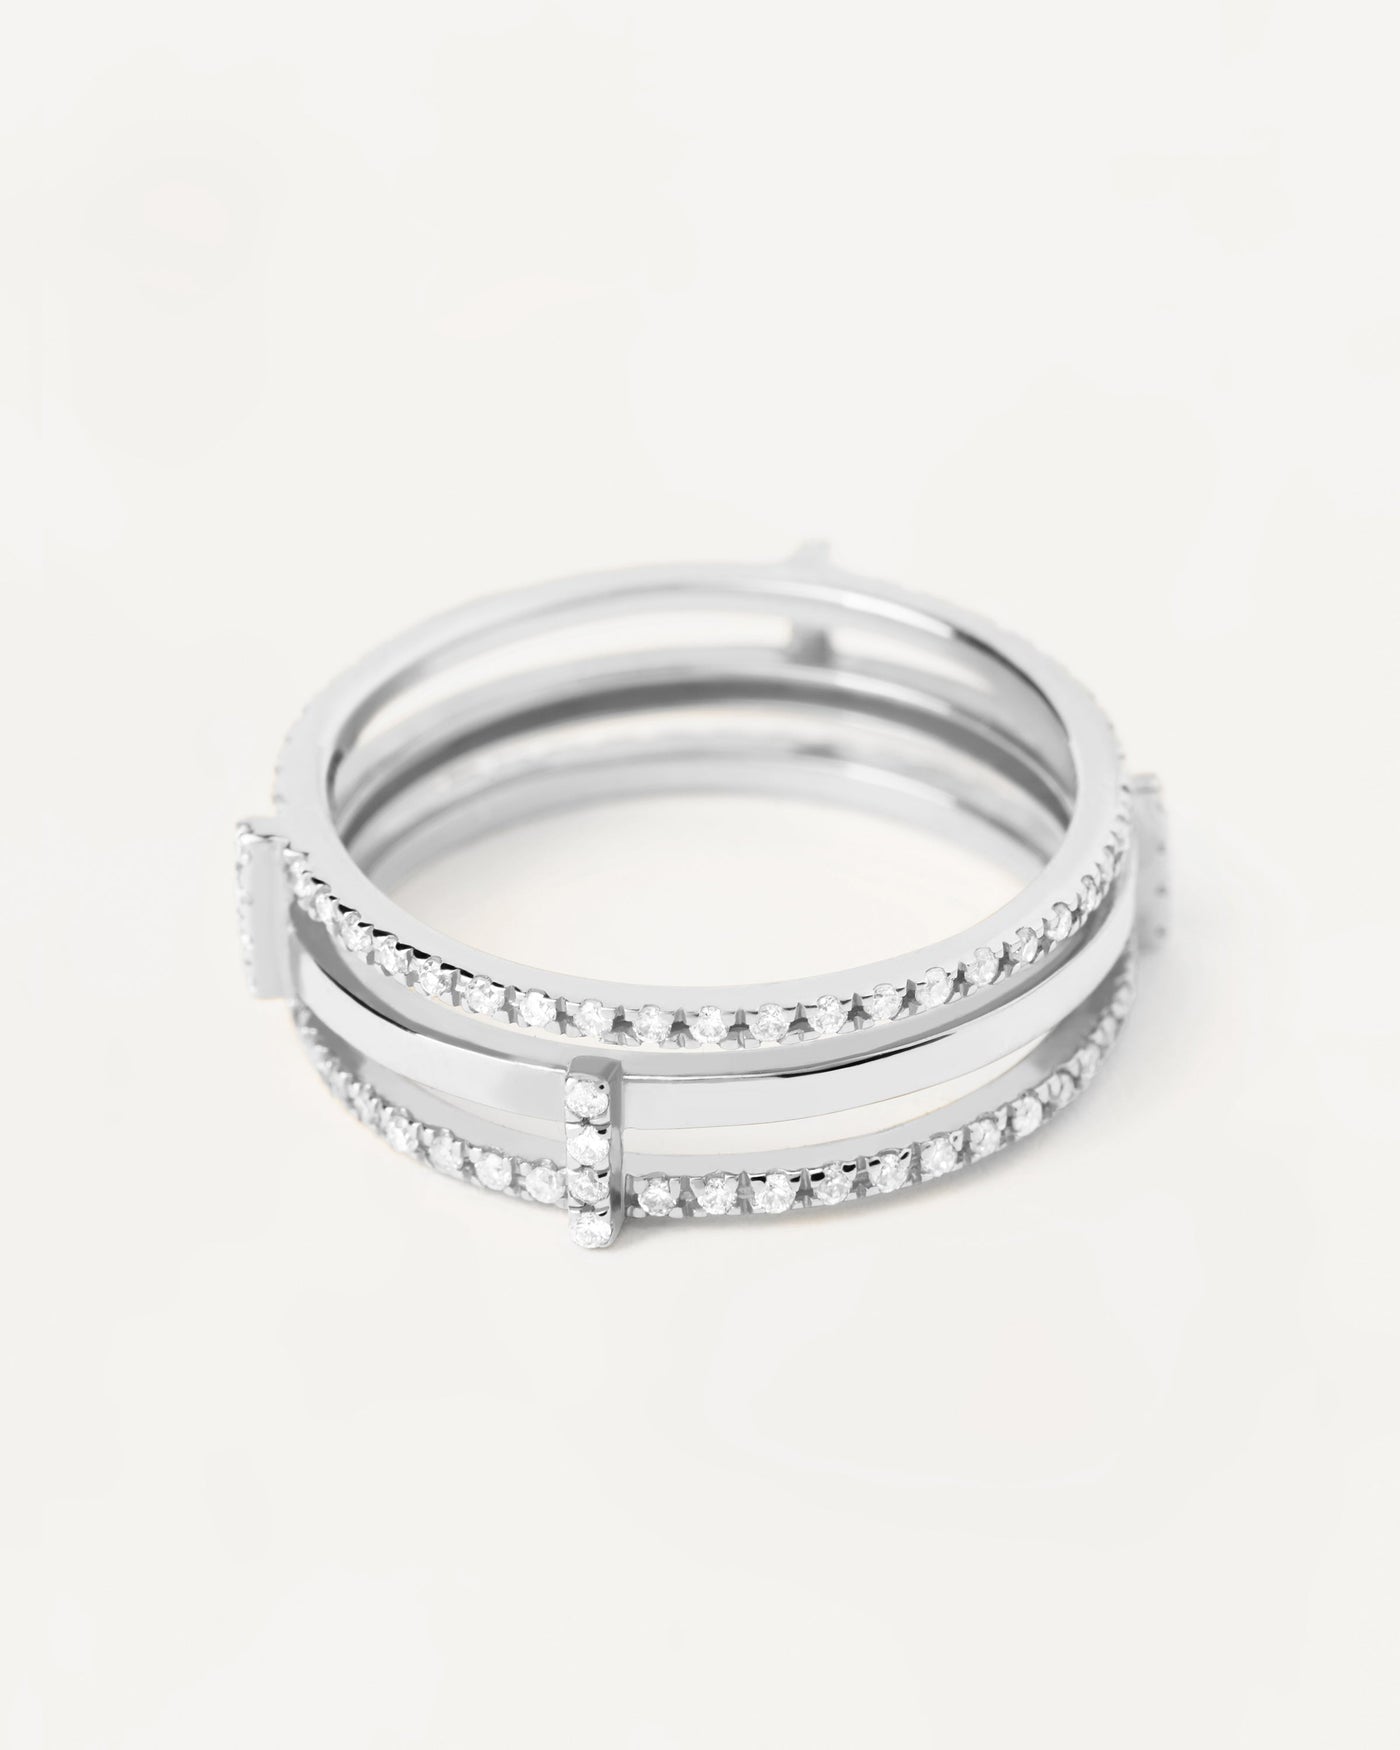 2023 Selection | Diamonds And White Gold Track Ring. 18K white gold eternity ring with three bands of lab-grown diamonds, making 0.52 carat. Get the latest arrival from PDPAOLA. Place your order safely and get this Best Seller. Free Shipping.